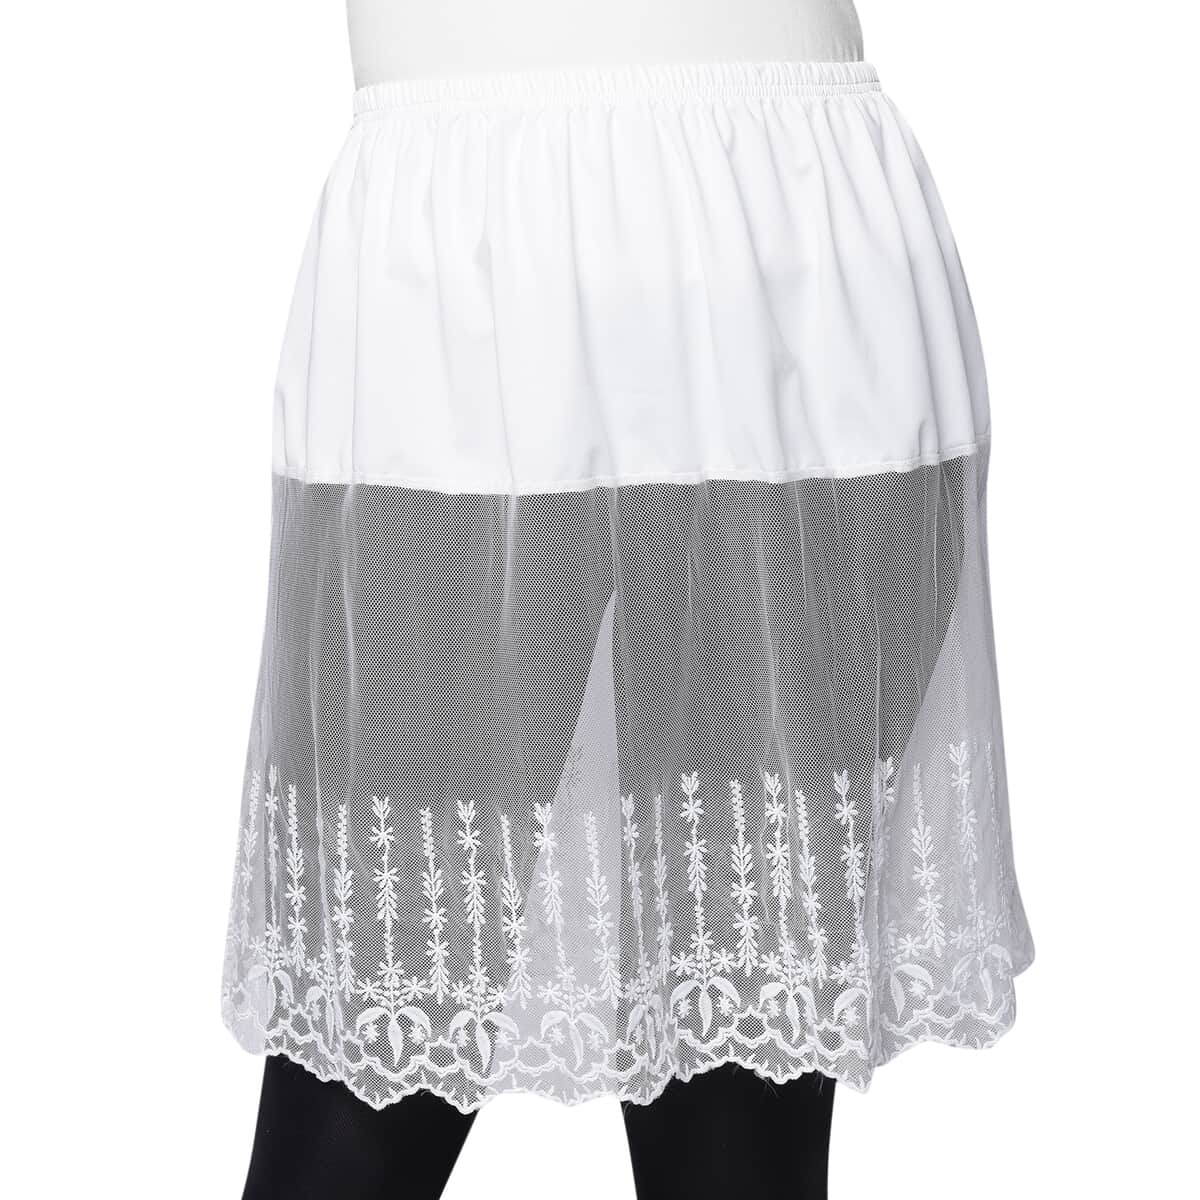 White Lace Skirt Extender with Elastic Waistband (Polyester, S/M) image number 0